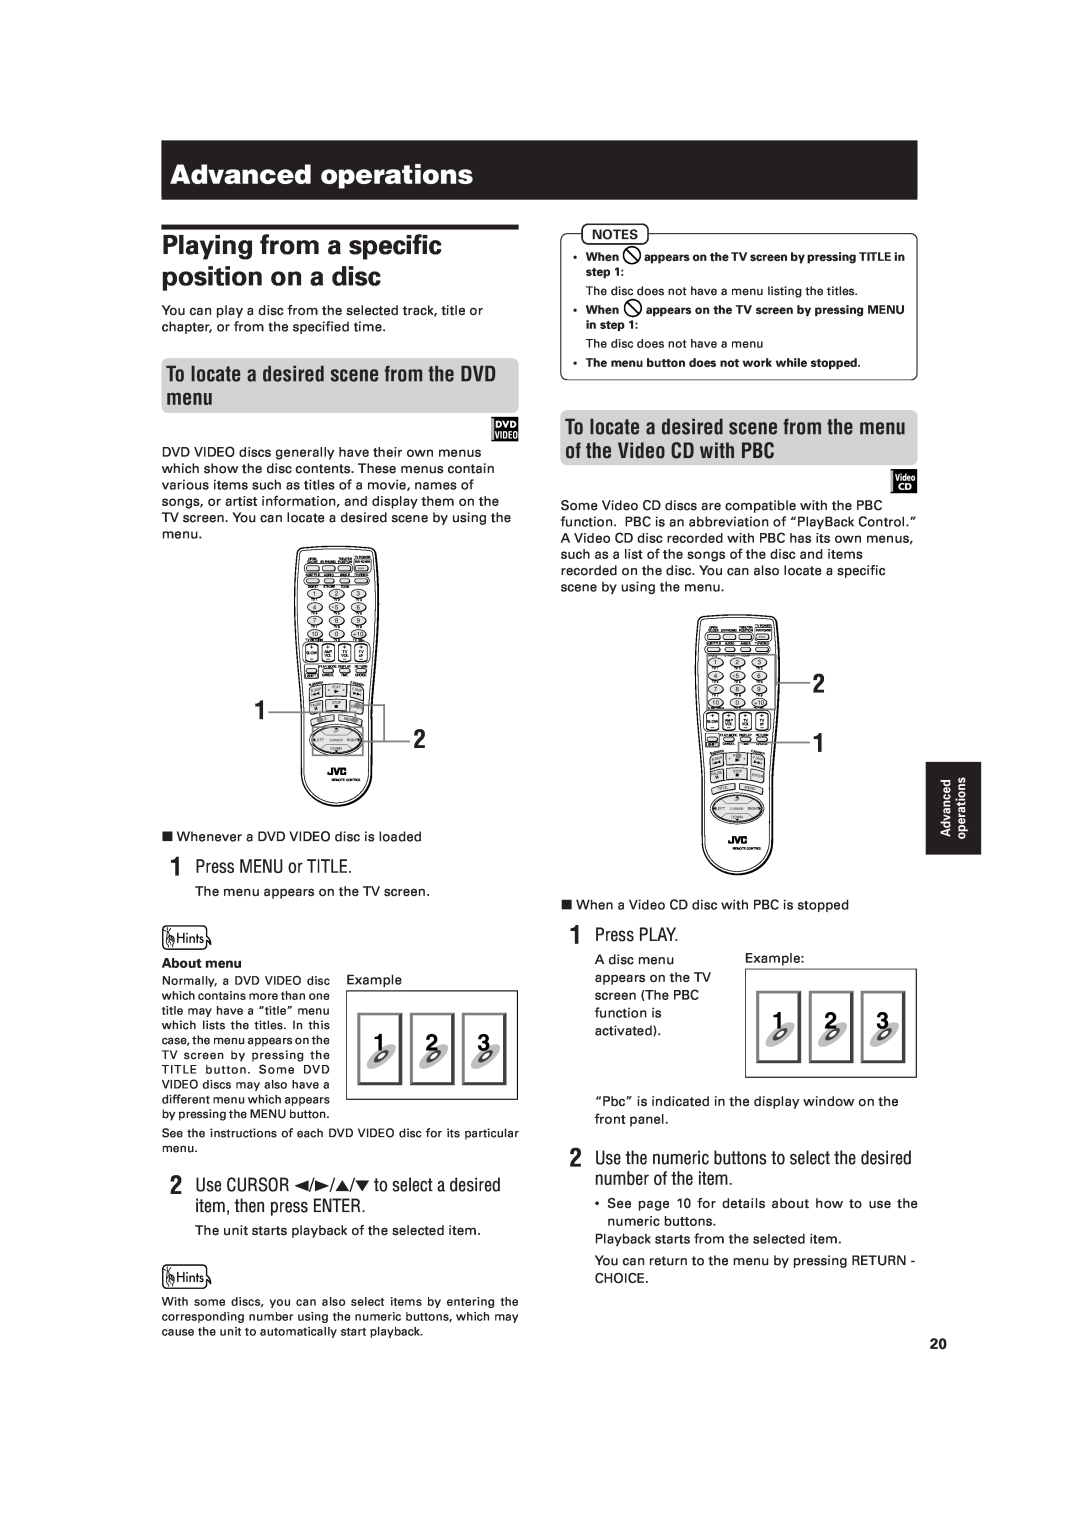 JVC XV-521BK manual Advanced operations, To locate a desired scene from the DVD menu, Press MENU or TITLE, Press PLAY 